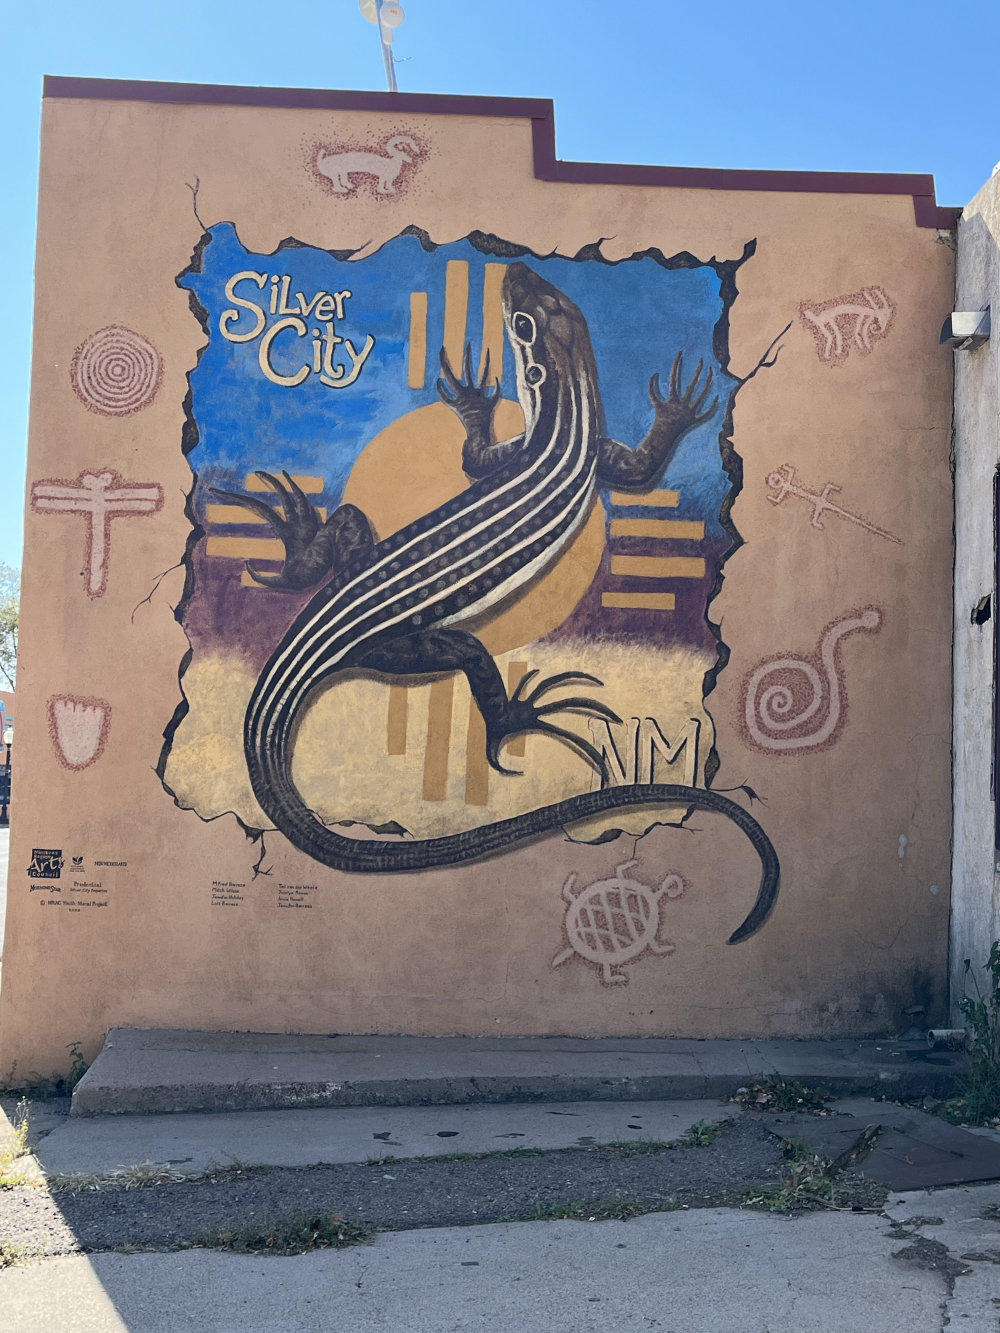 mural in Silver City by artist unknown.